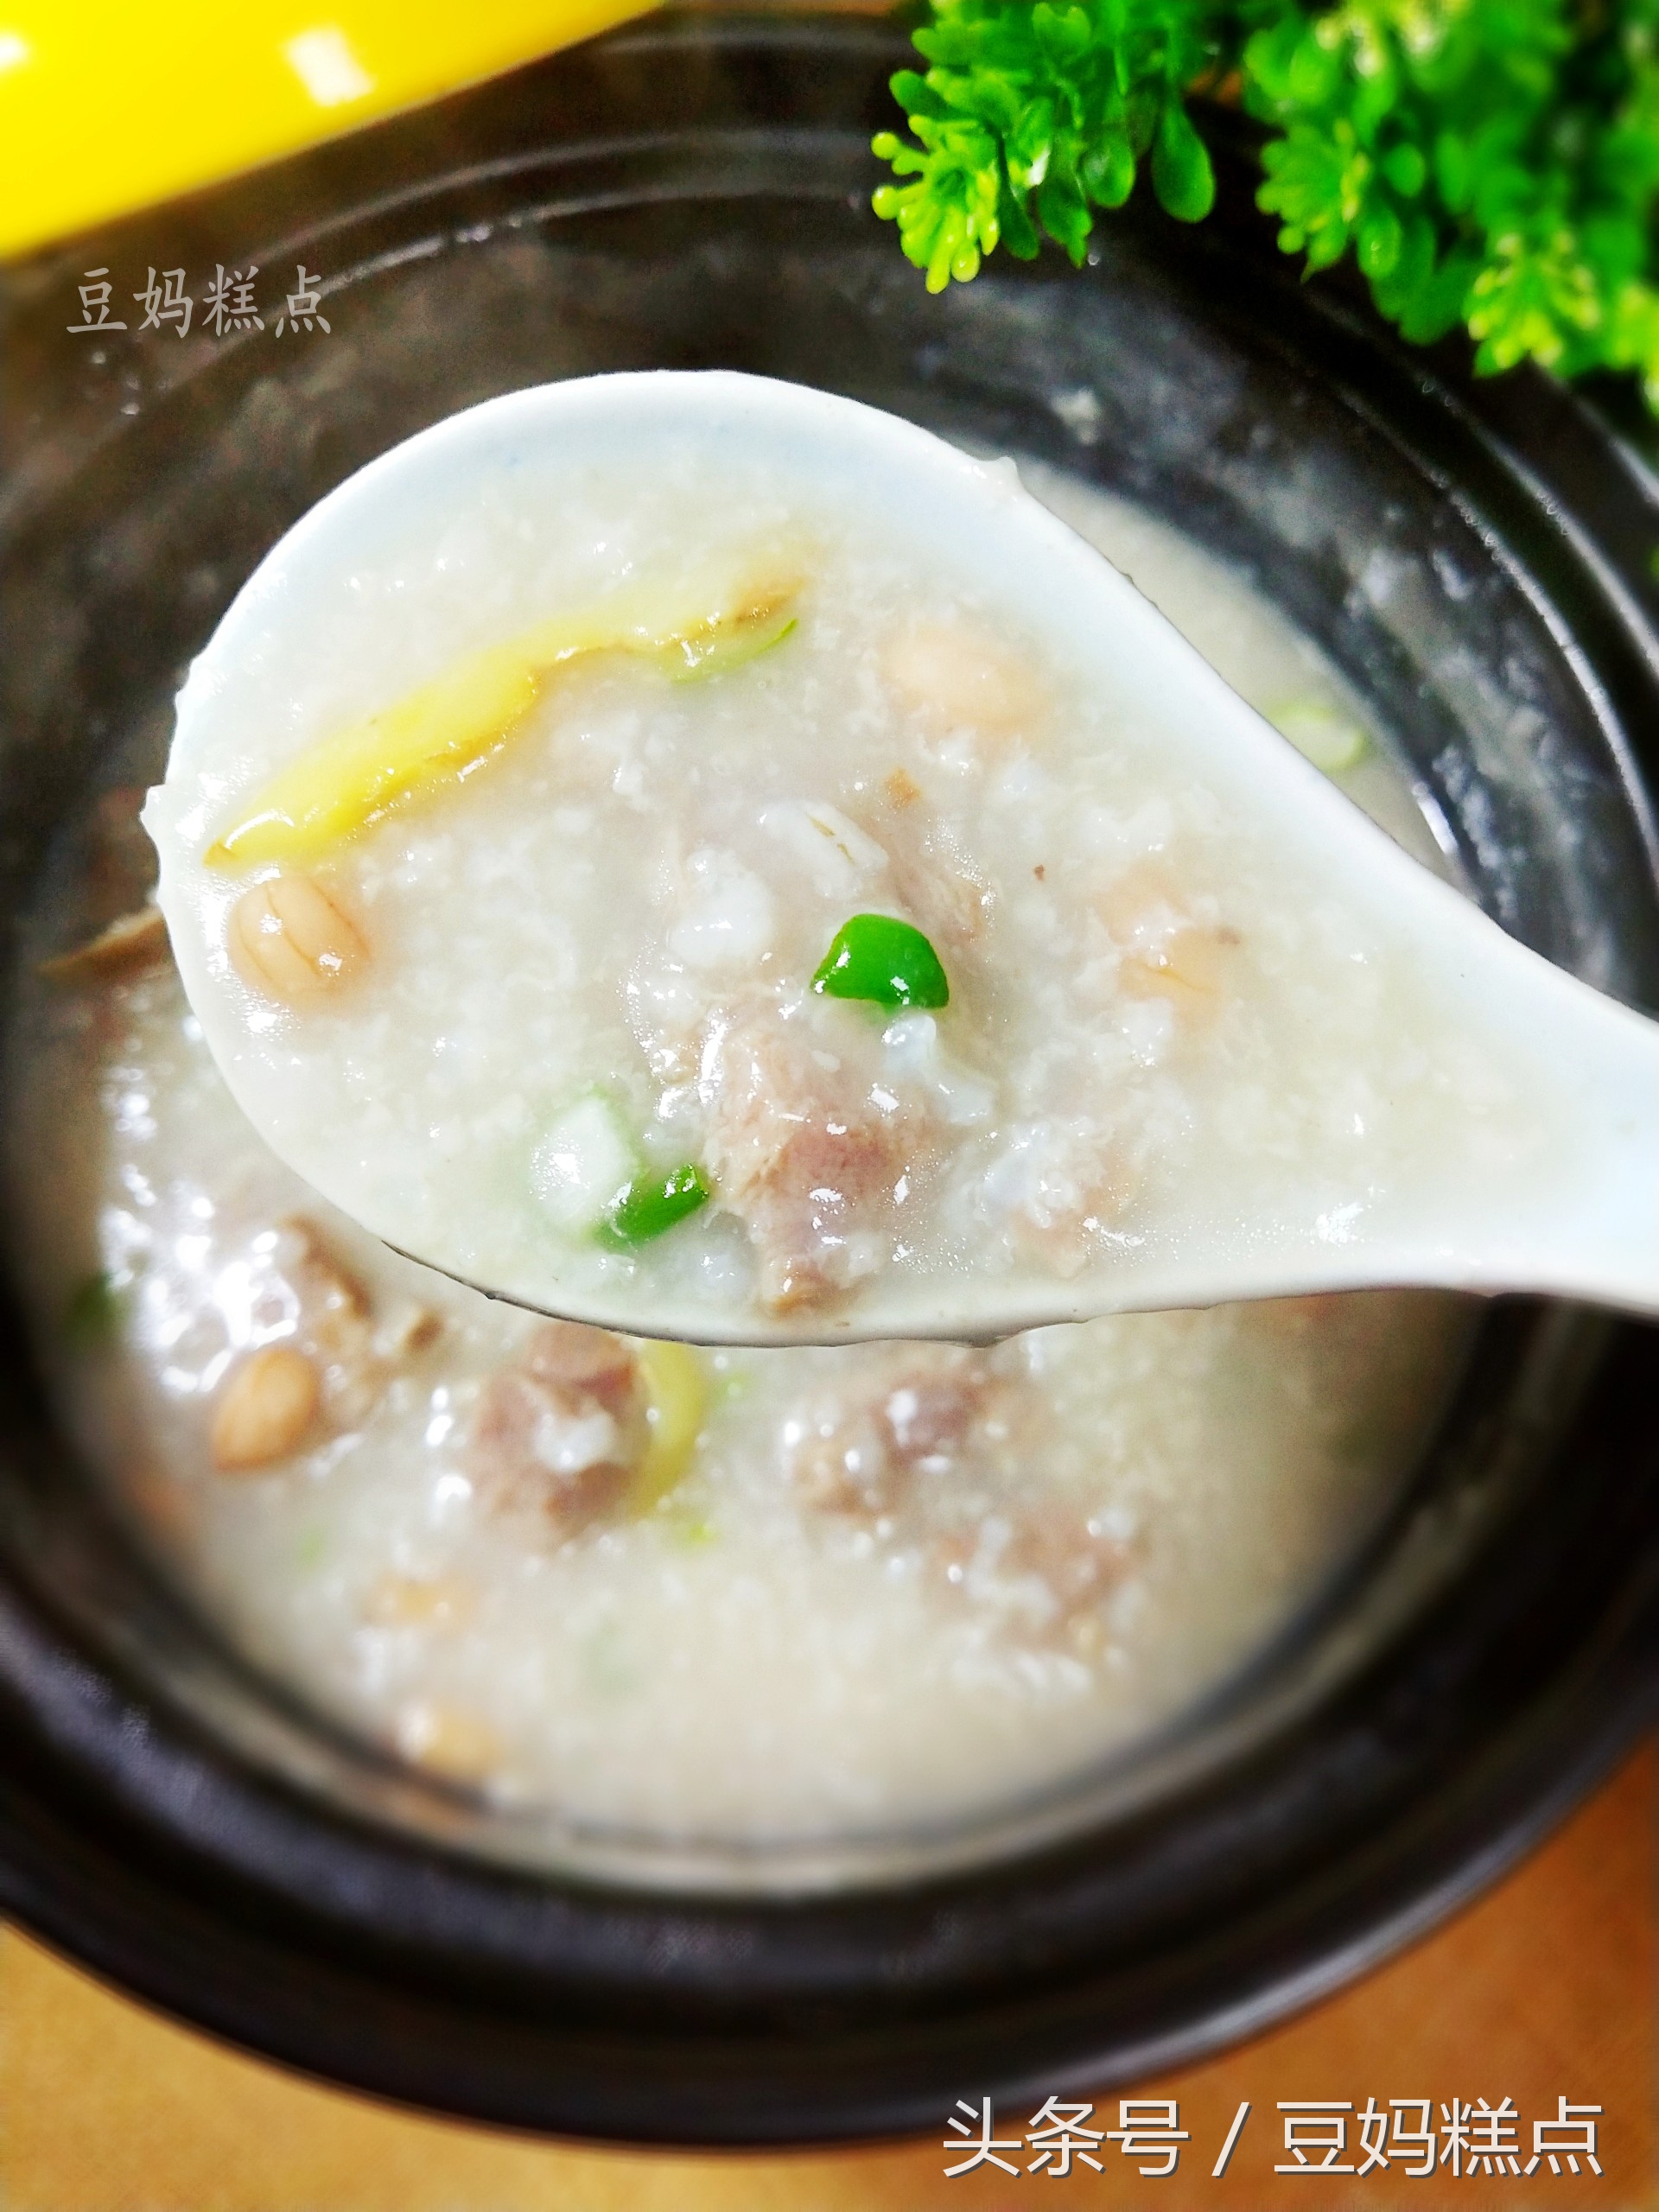 A taste of memories -- Echo's Kitchen: 【咸排骨花生粥】Salted Ribs and Peanut Congee